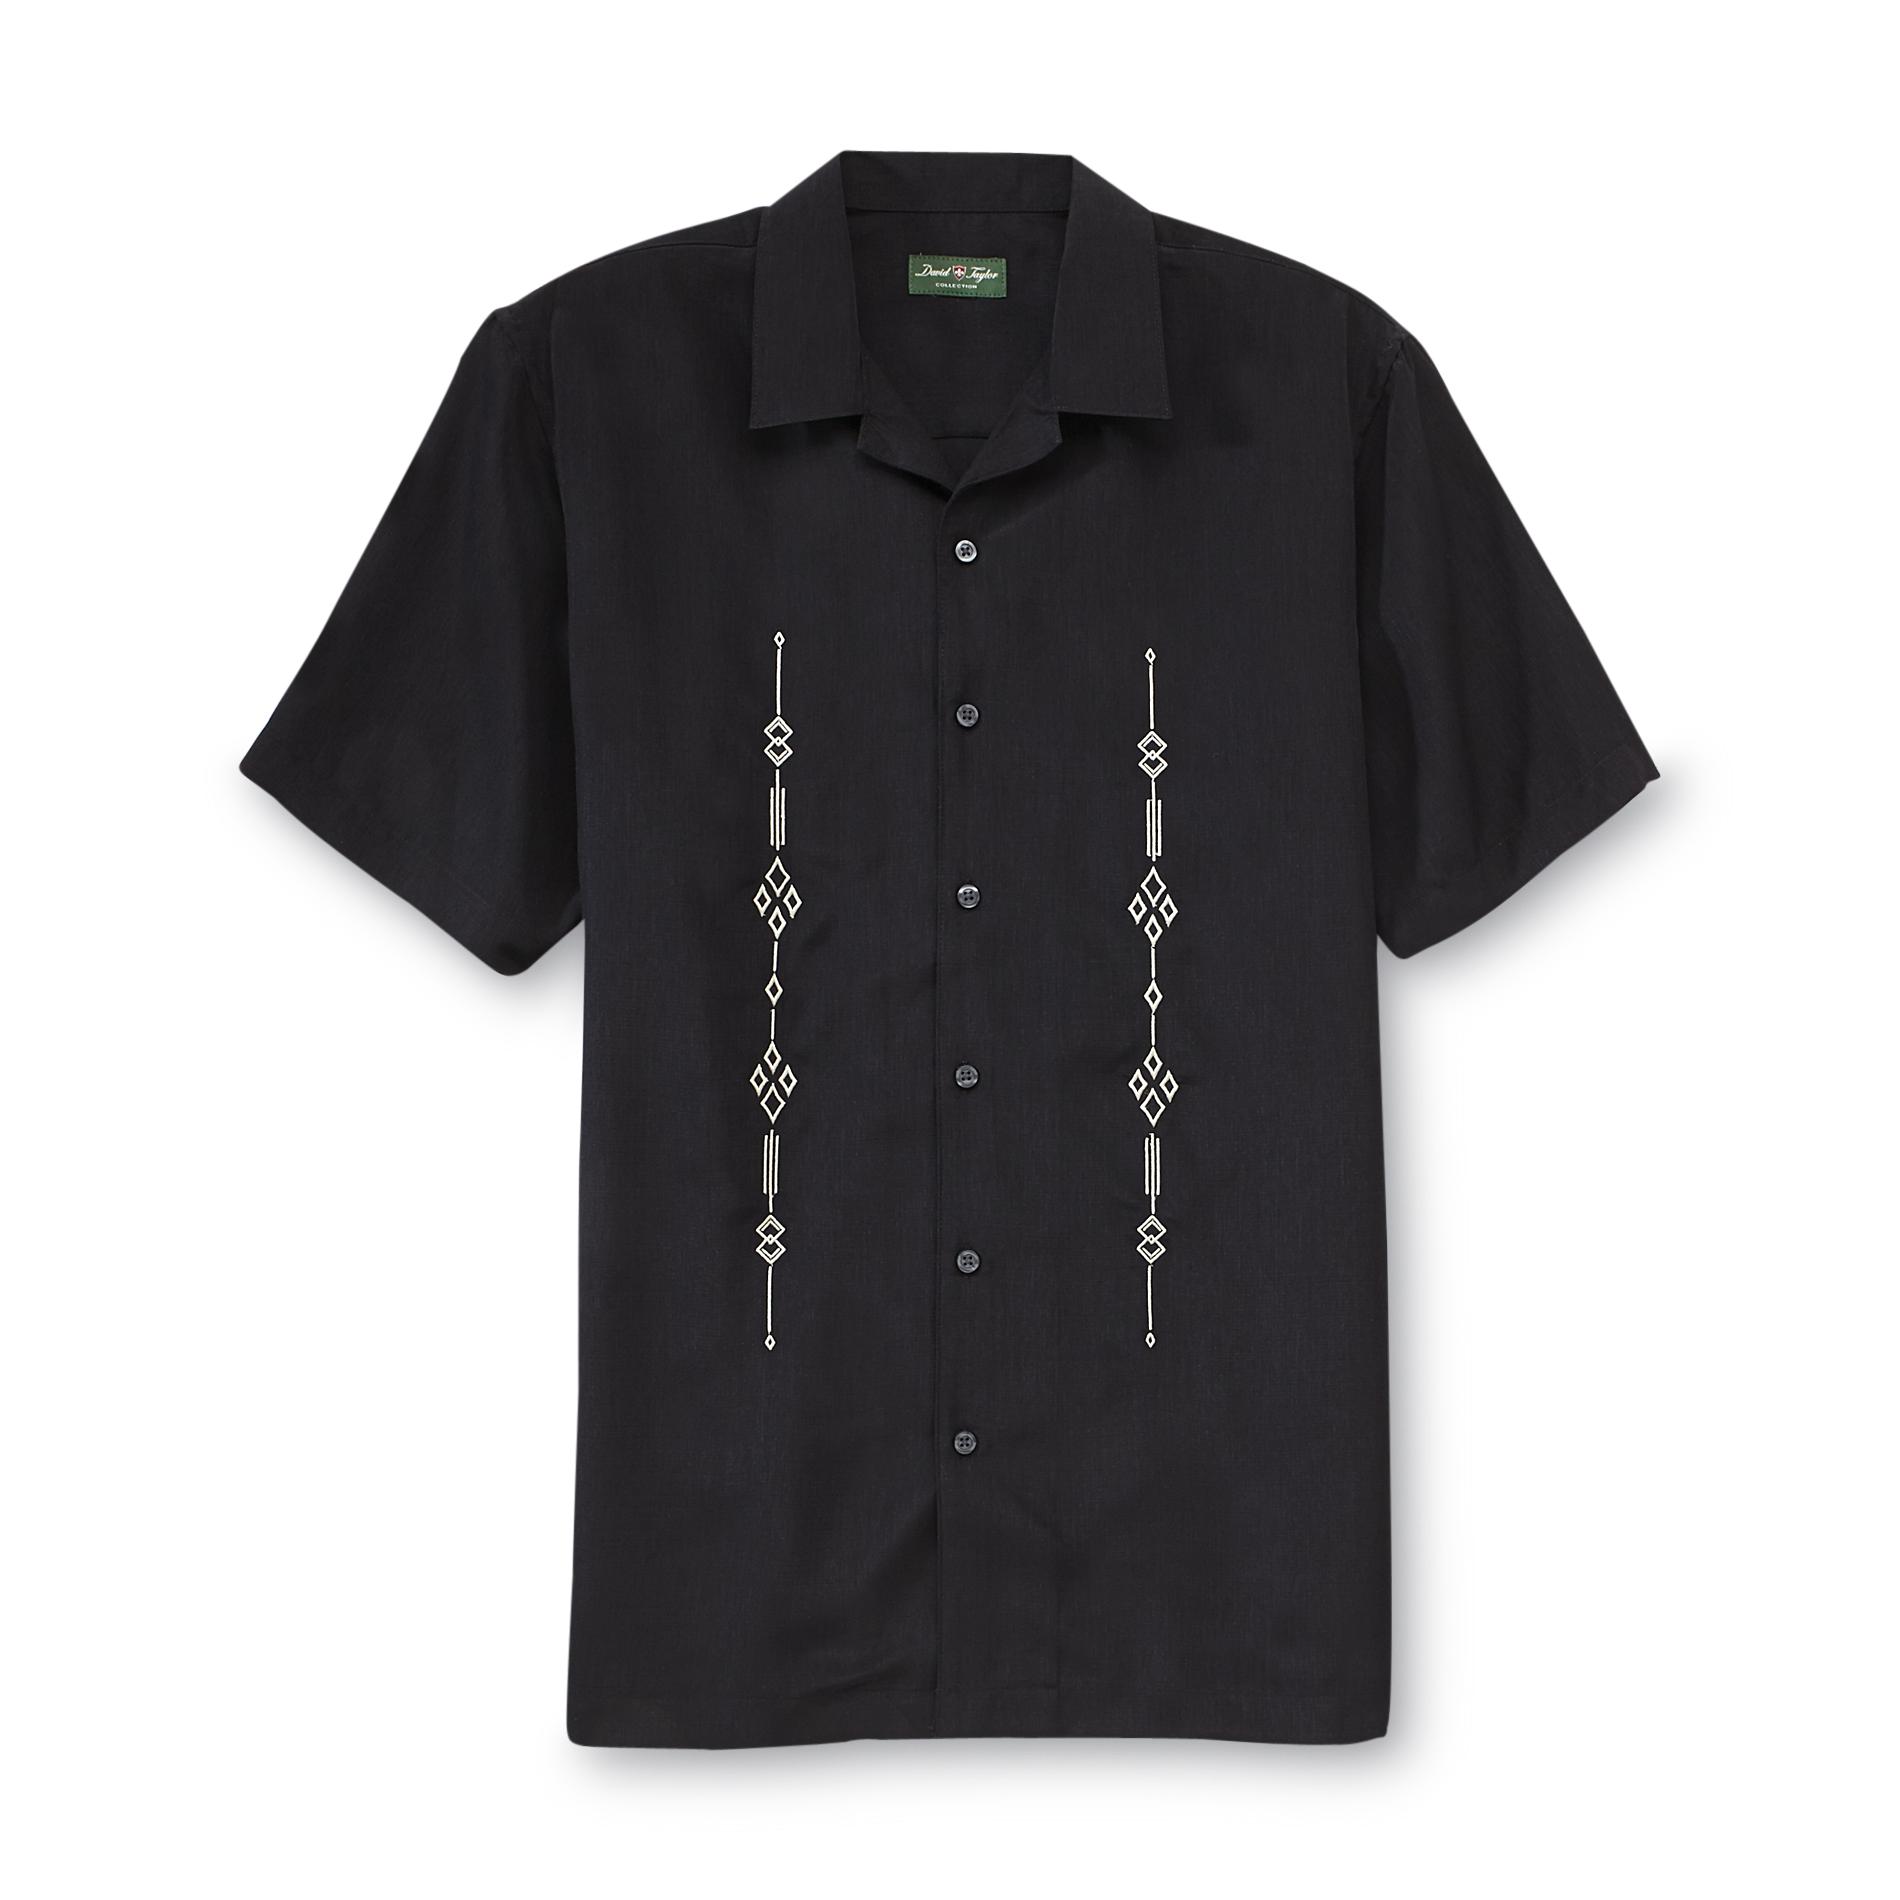 David Taylor Collection Men's Big & Tall Woven Shirt - Embroidered